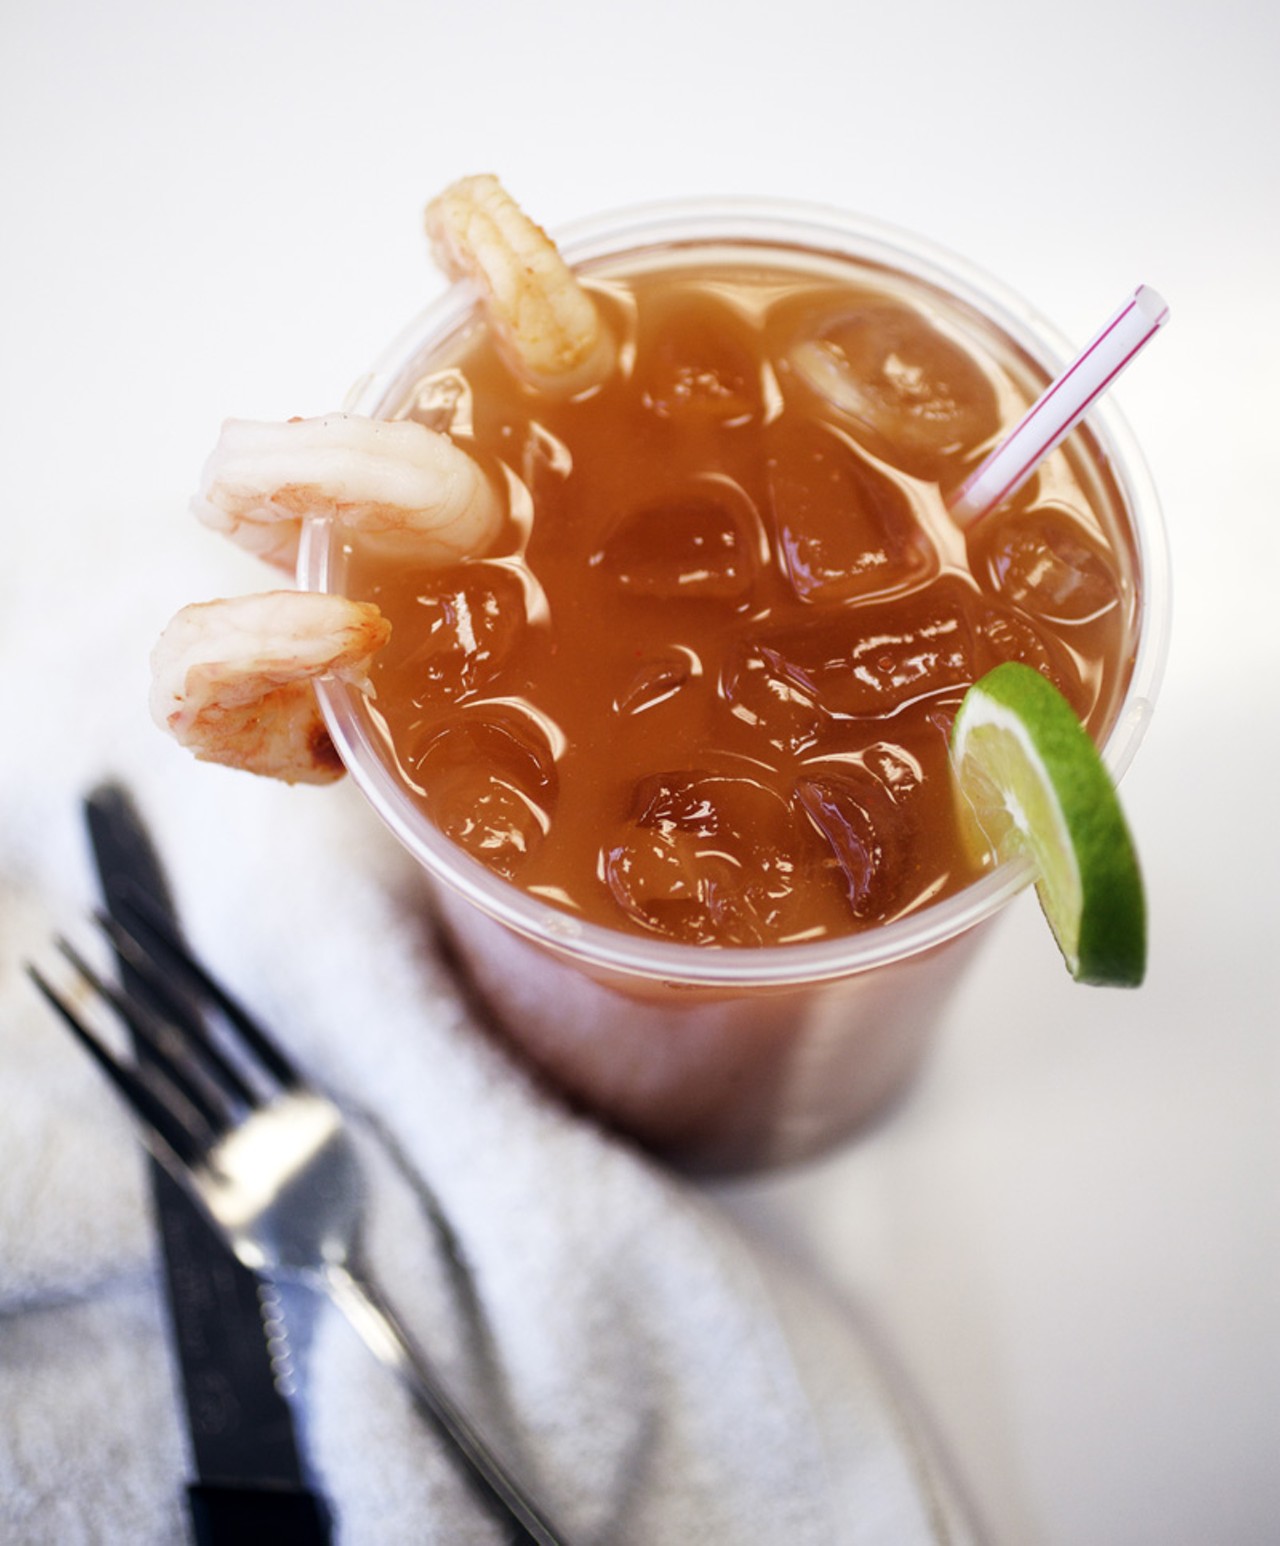 Michelada estilo Mexico is beer, 3 types of powdered chili, salt, lime and shrimp.